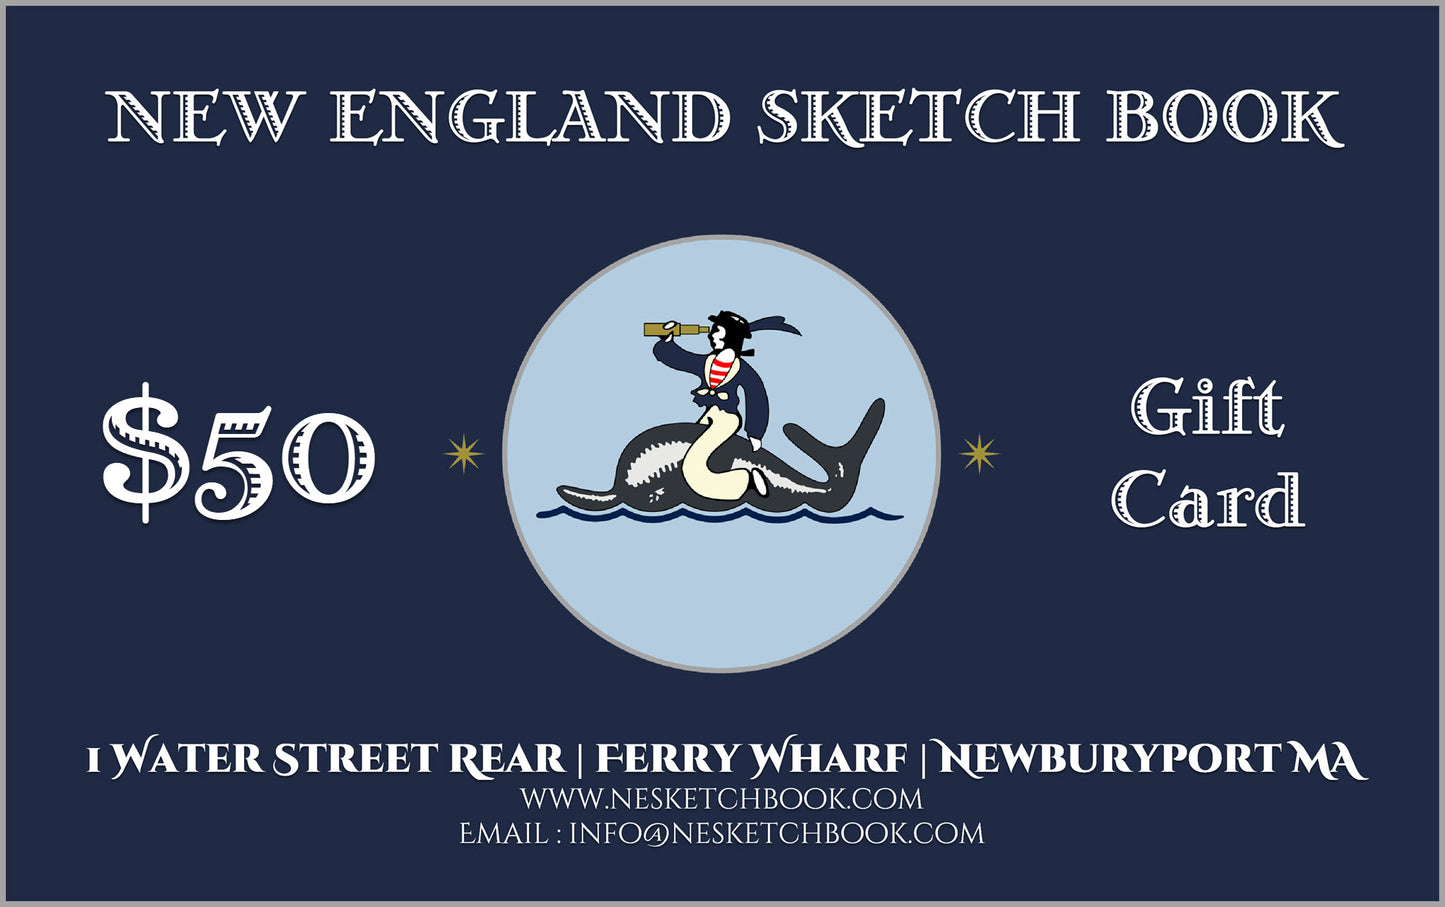 New England Sketch-Book Gift Card